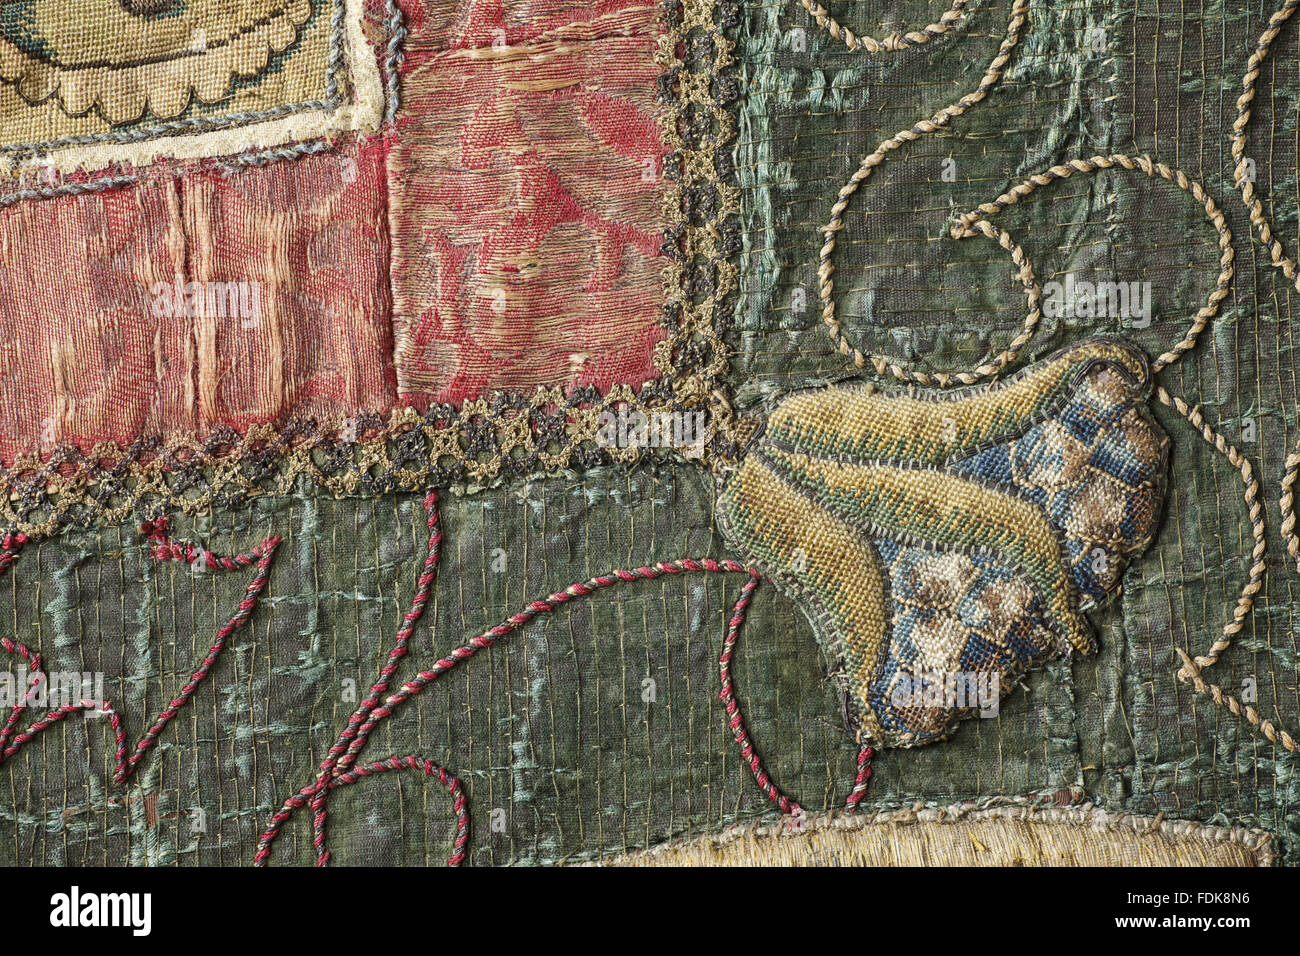 Close view of part of the Marian hangings at Oxburgh Hall, Norfolk. The needlework panels were made about 1569-84 by Mary, Queen of Scots and Bess of Hardwick during the time of Mary's imprisonment at Tutbury Castle. The small applique panels are worked i Stock Photo